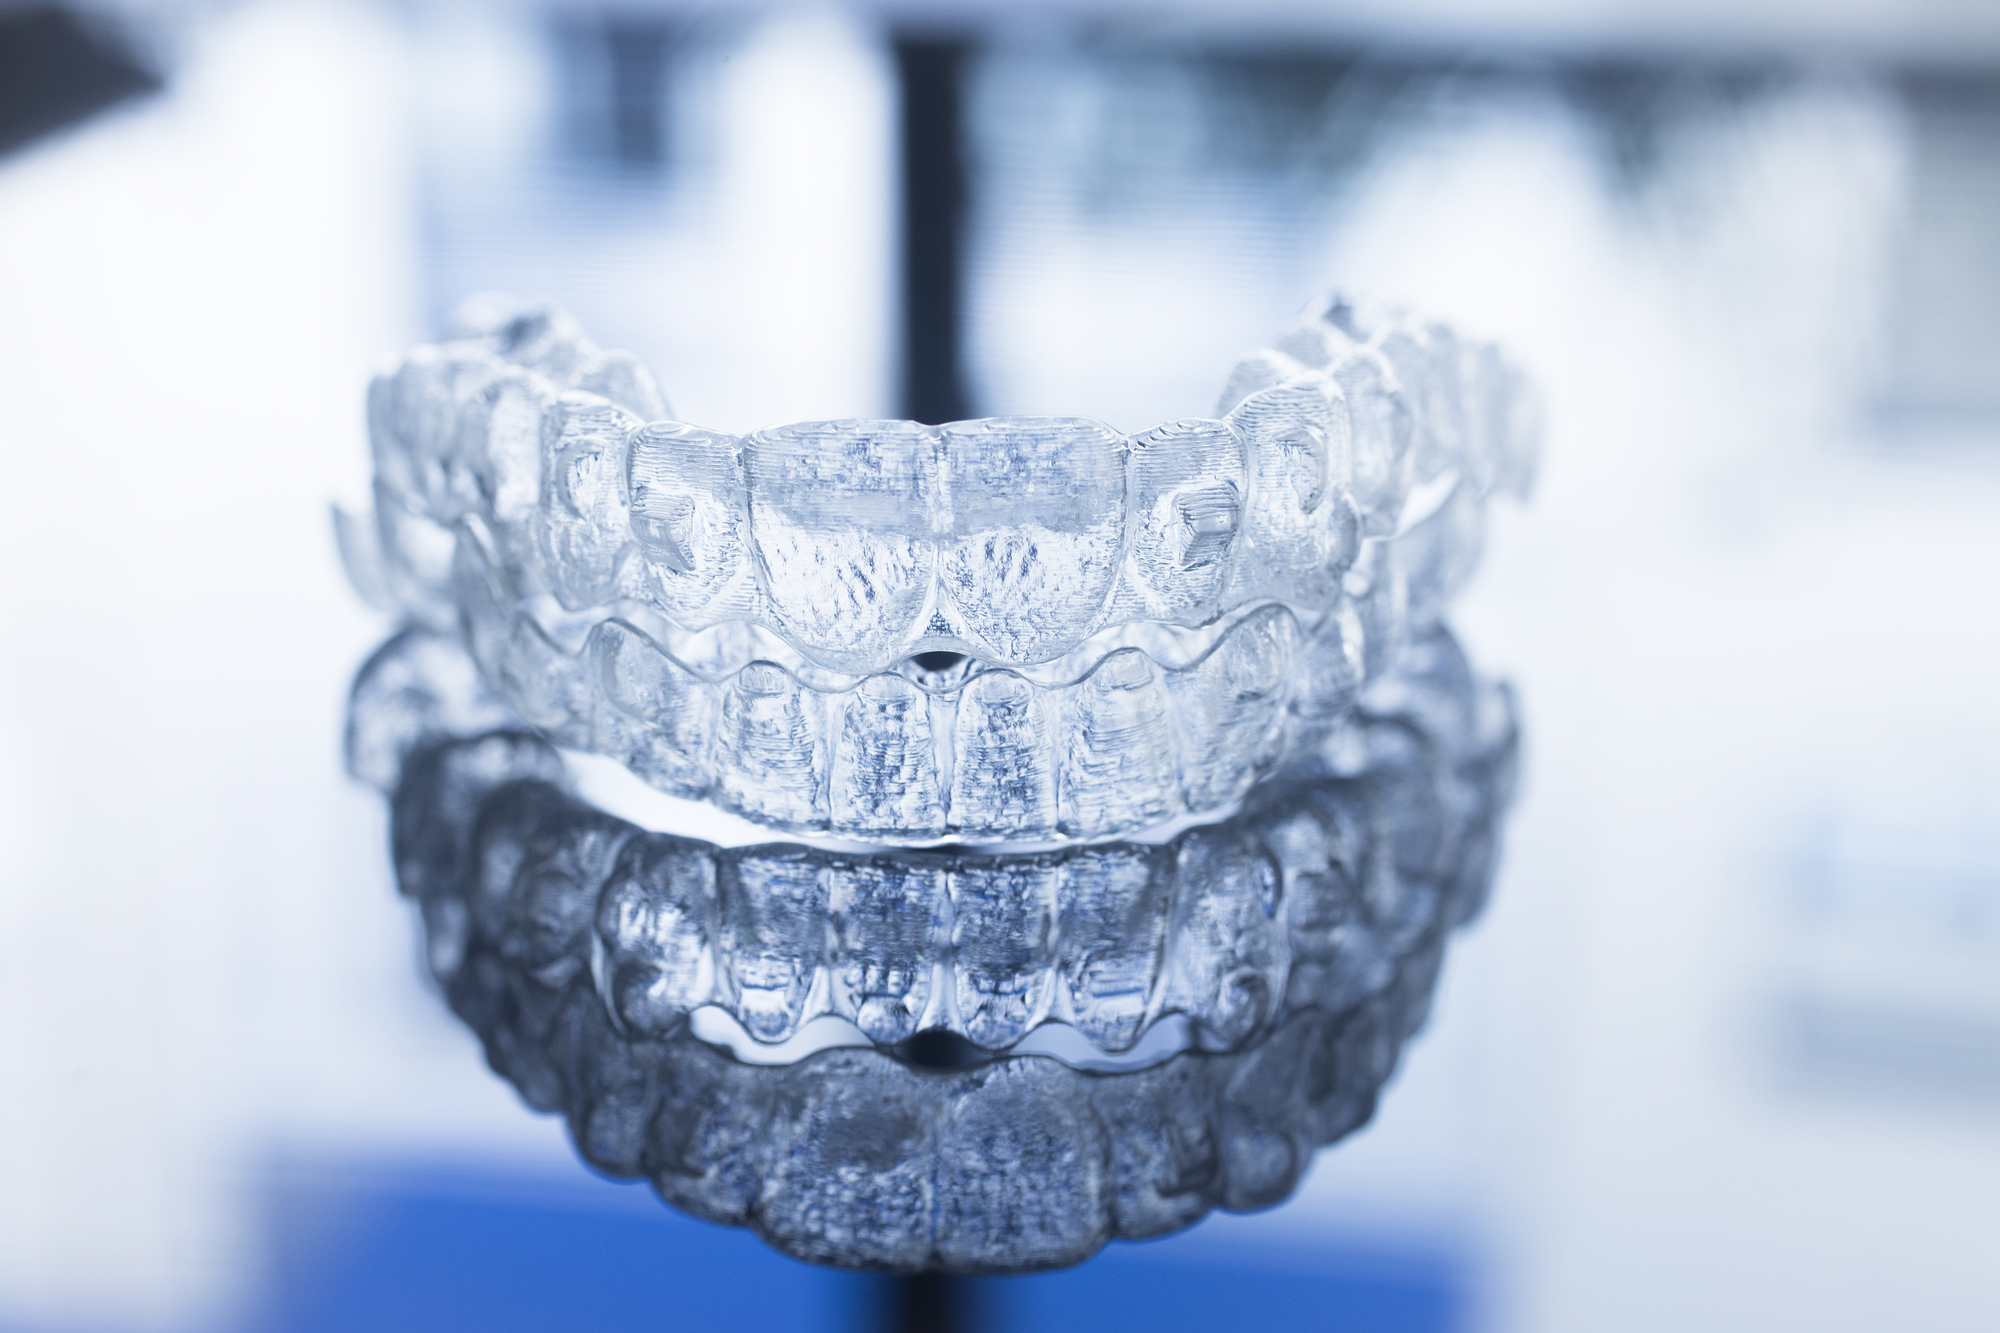 who can give me straighte teeth with invisalign in orlando?